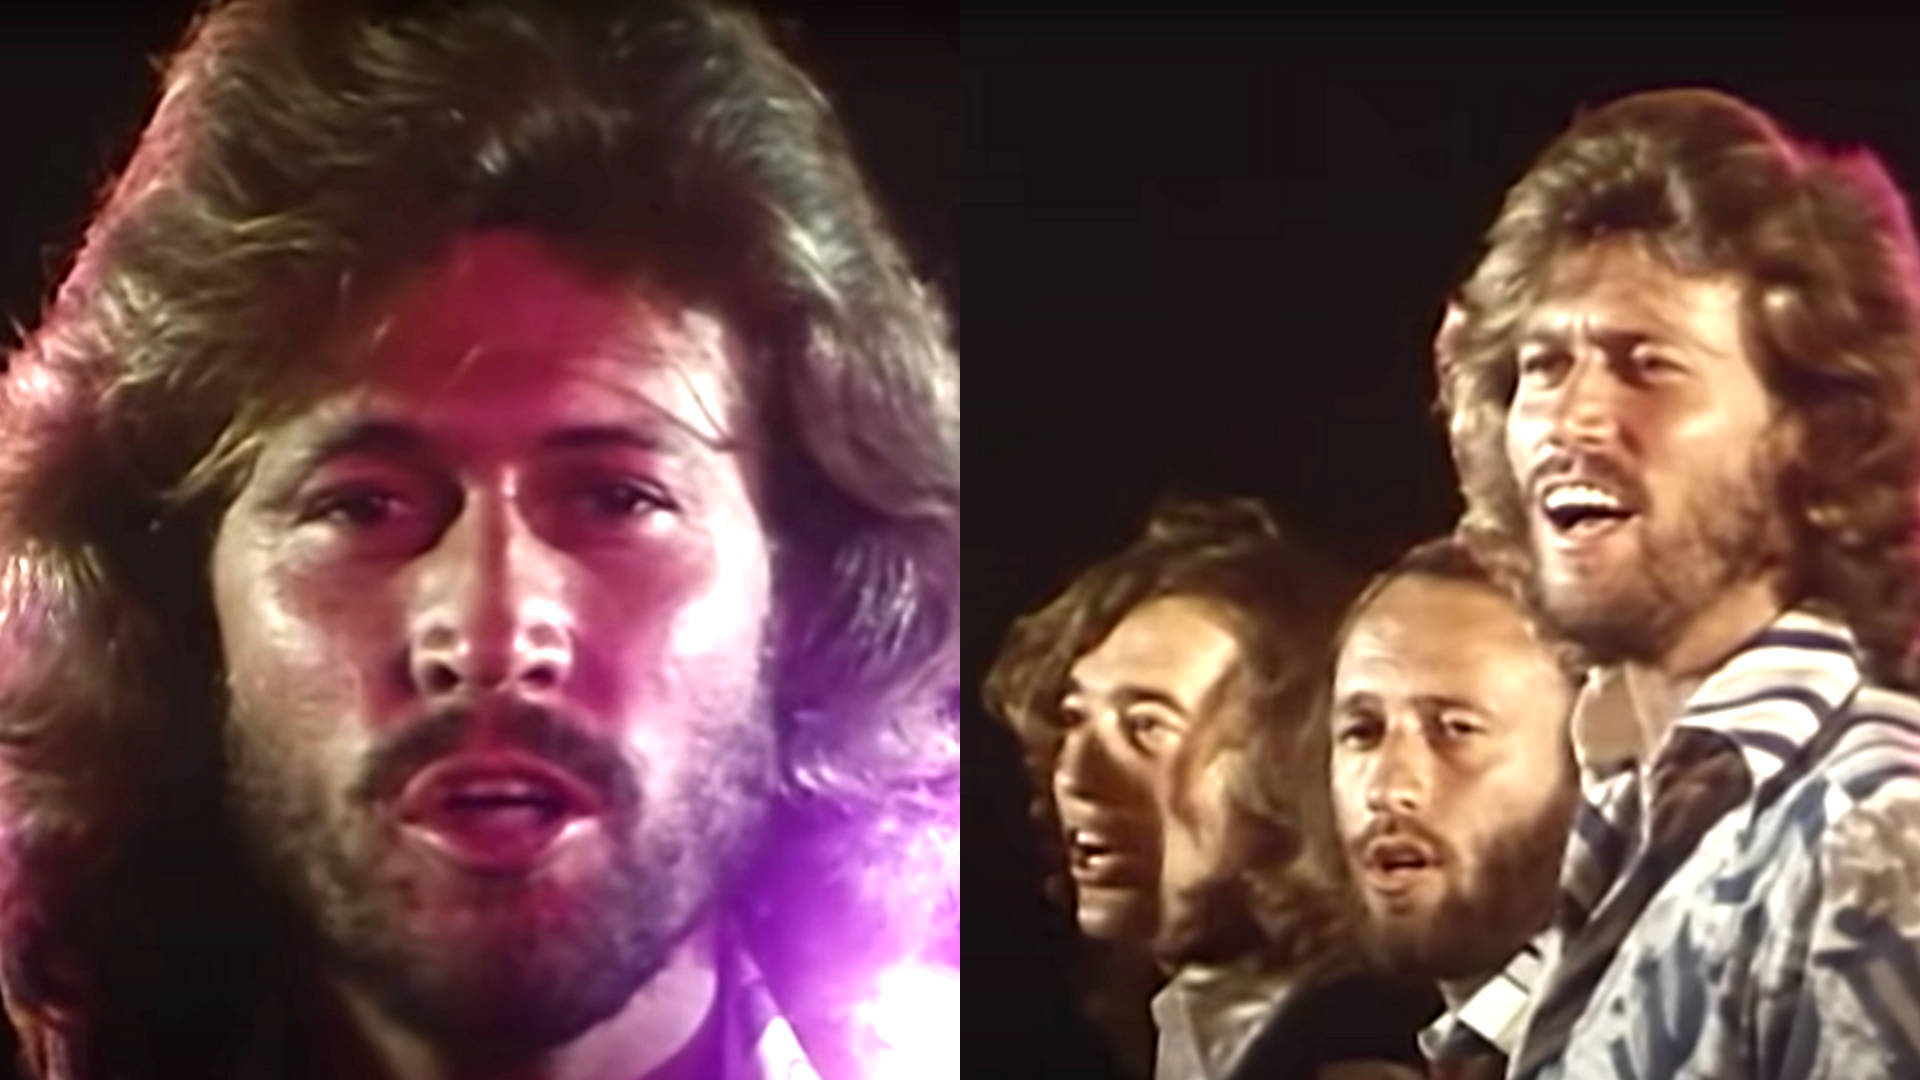 Bee Gees Barry Gibb Photo Combination Wallpaper